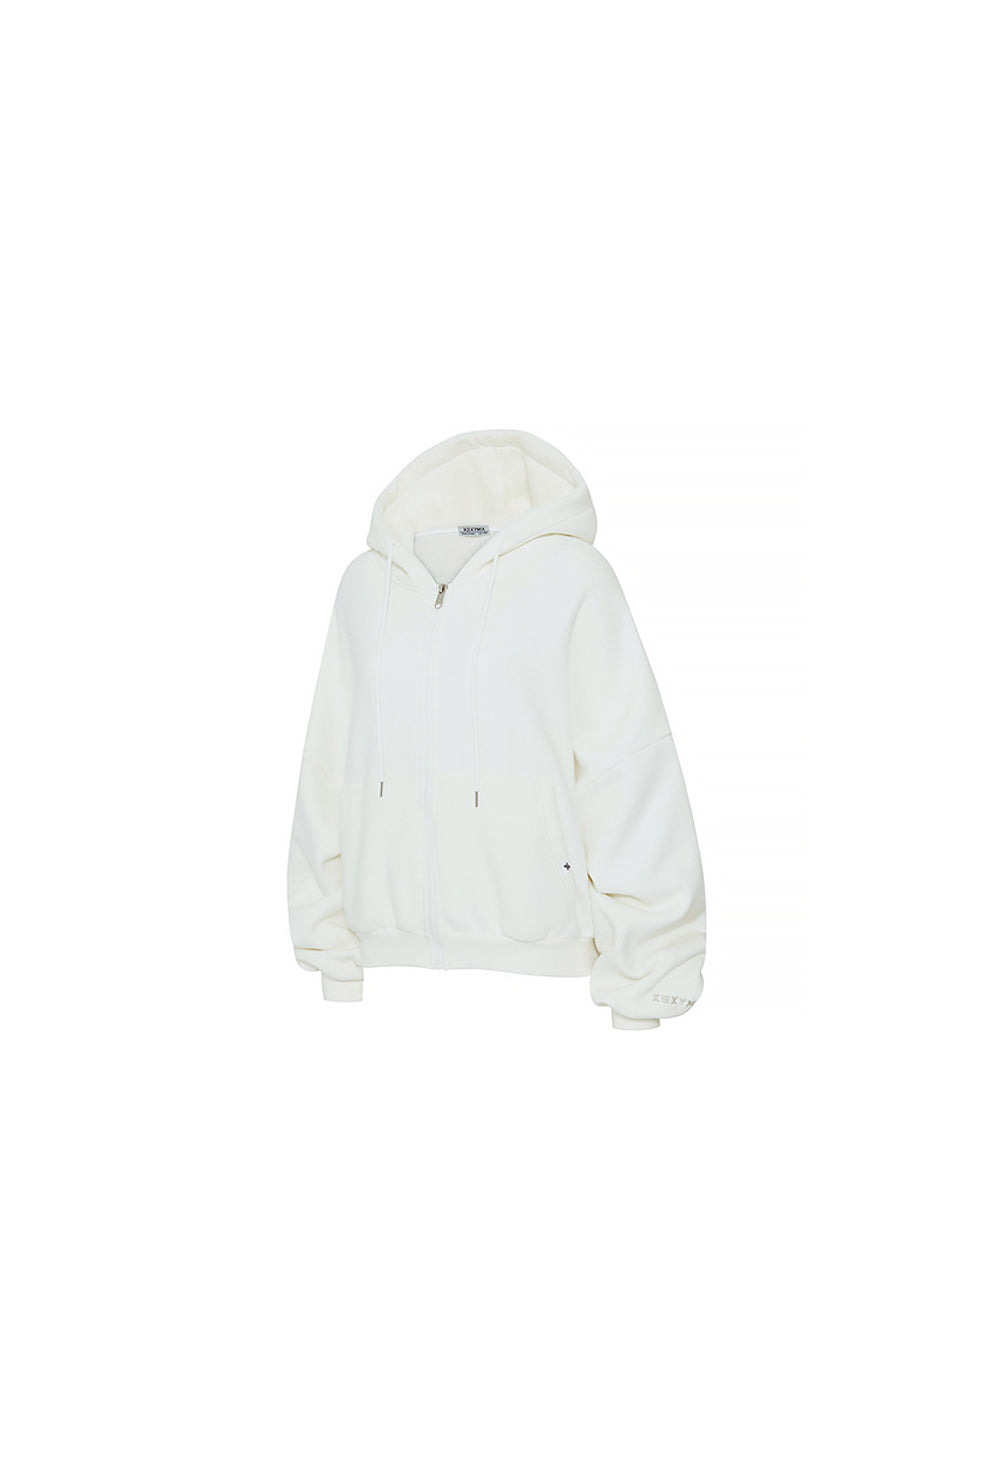 Napping Hood Zip-up - Brushed Cream